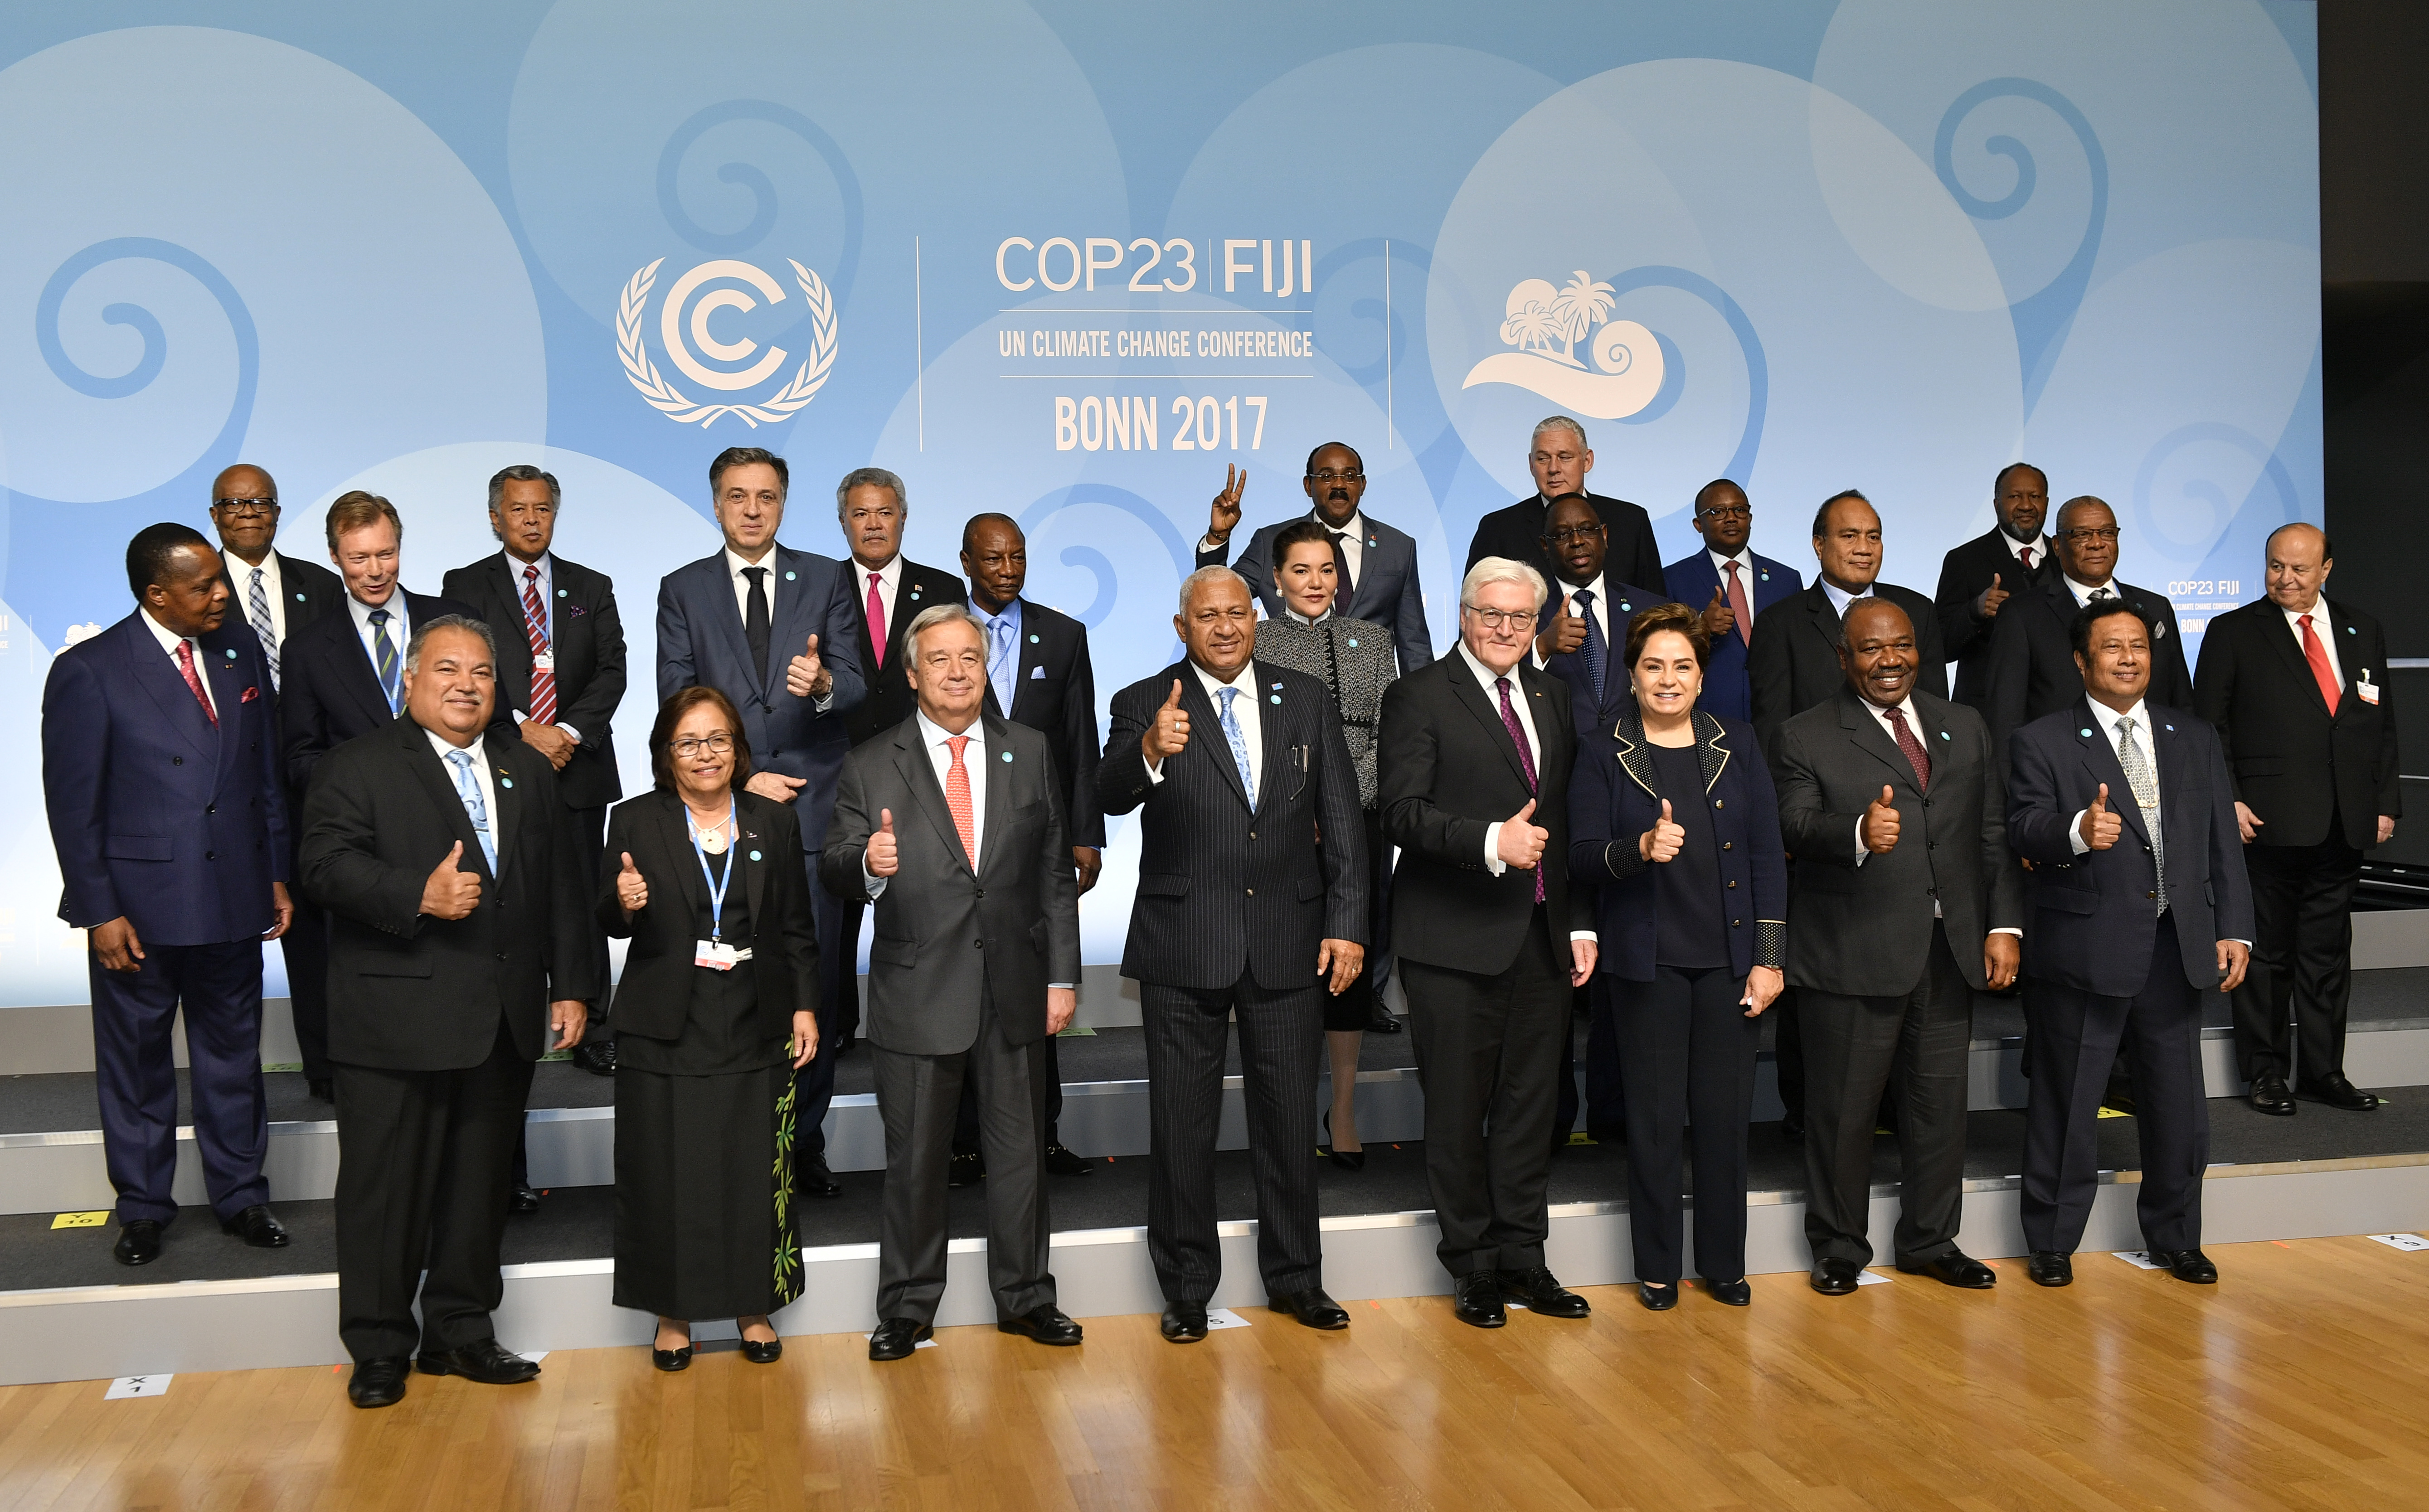 Fiji prime minister and COP president Frank Bainimarama, center, is flanked by UN Secretary General Antonio Guterres, left of him, and German President Frank-Walter Steinmeier and Patricia Espinosa, executive secretary of the United Nations Framework Convention on Climate Change as they and other participants pose for a group photo during the 23rd Conference of the Parties (COP) climate talks in Bonn, Germany, Wednesday, Nov. 15, 2017. World leaders arrive at the global climate talks in Germany on Wednesday to give the negotiations a boost going into the final stretch. (AP Photo/Martin Meissner)